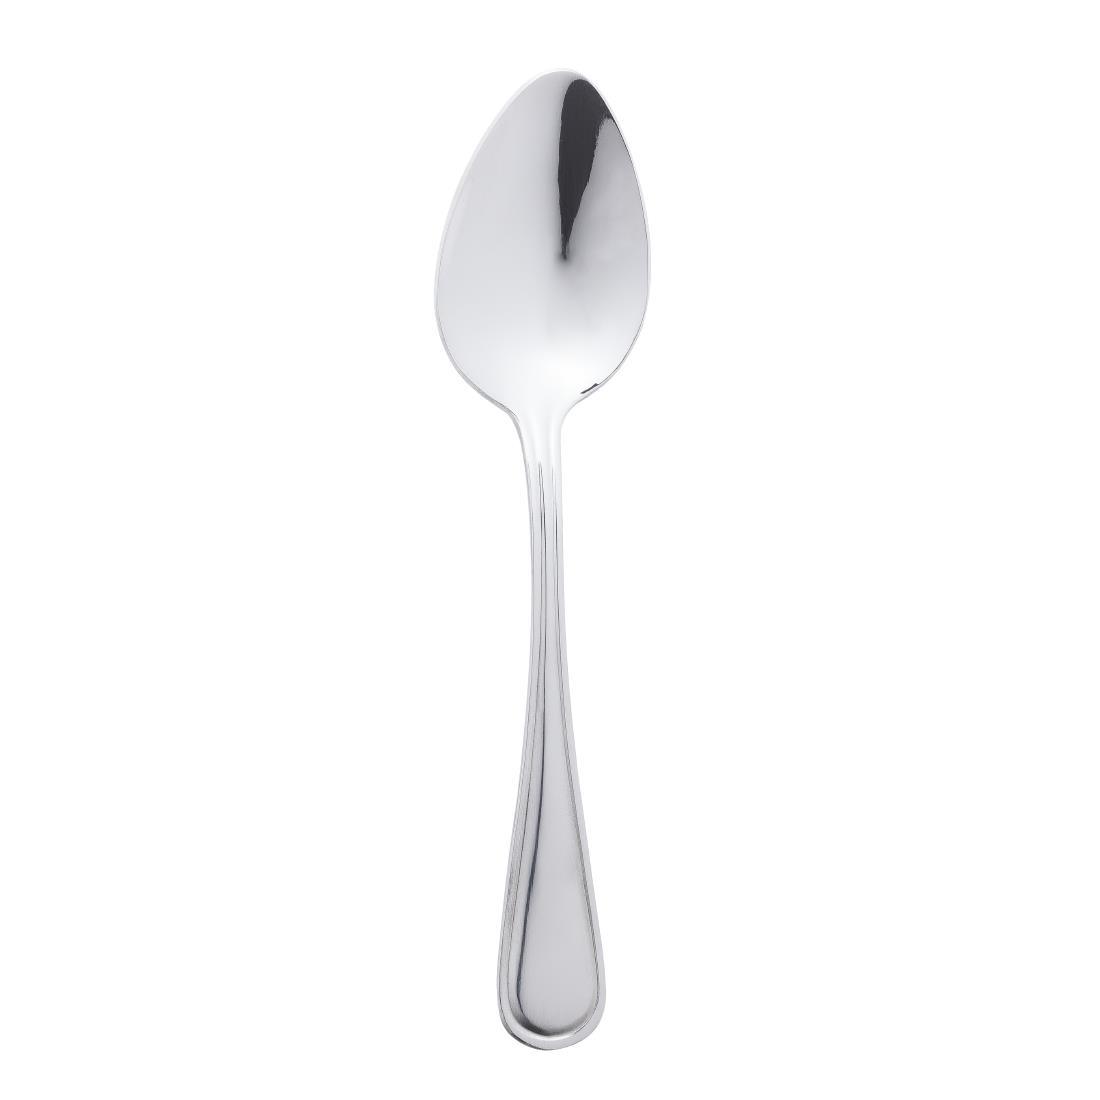 Olympia Mayfair Service Spoon (Pack of 12) - D509  - 2